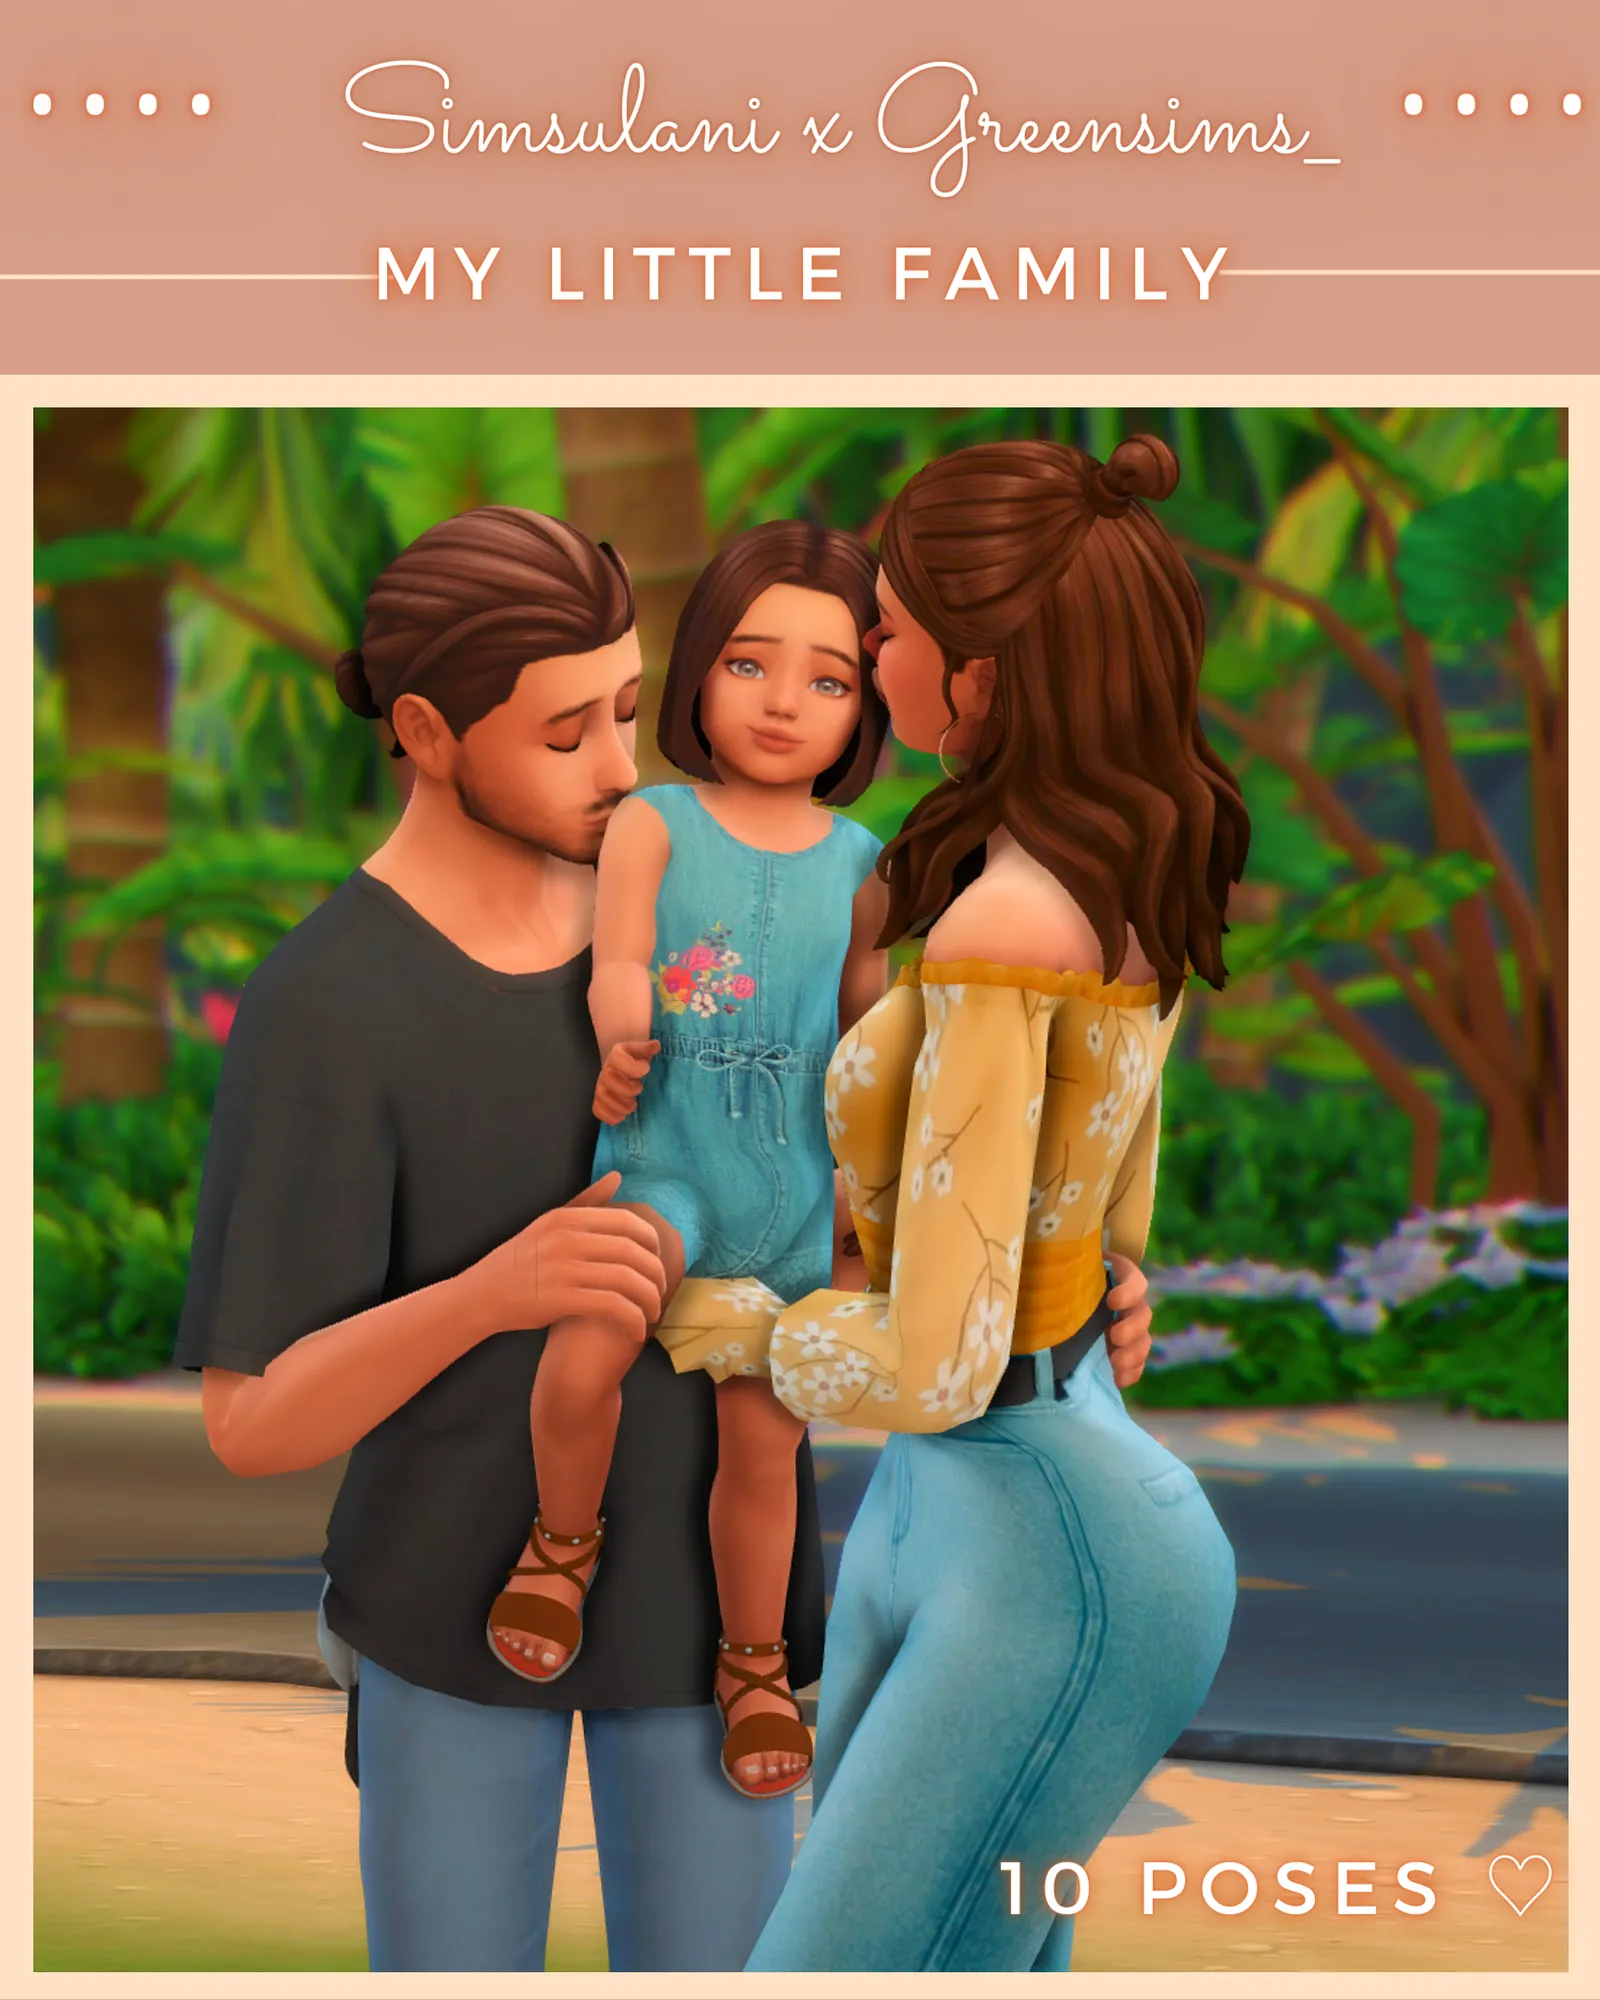 Greensims_ x Simsulani - My Little Family 